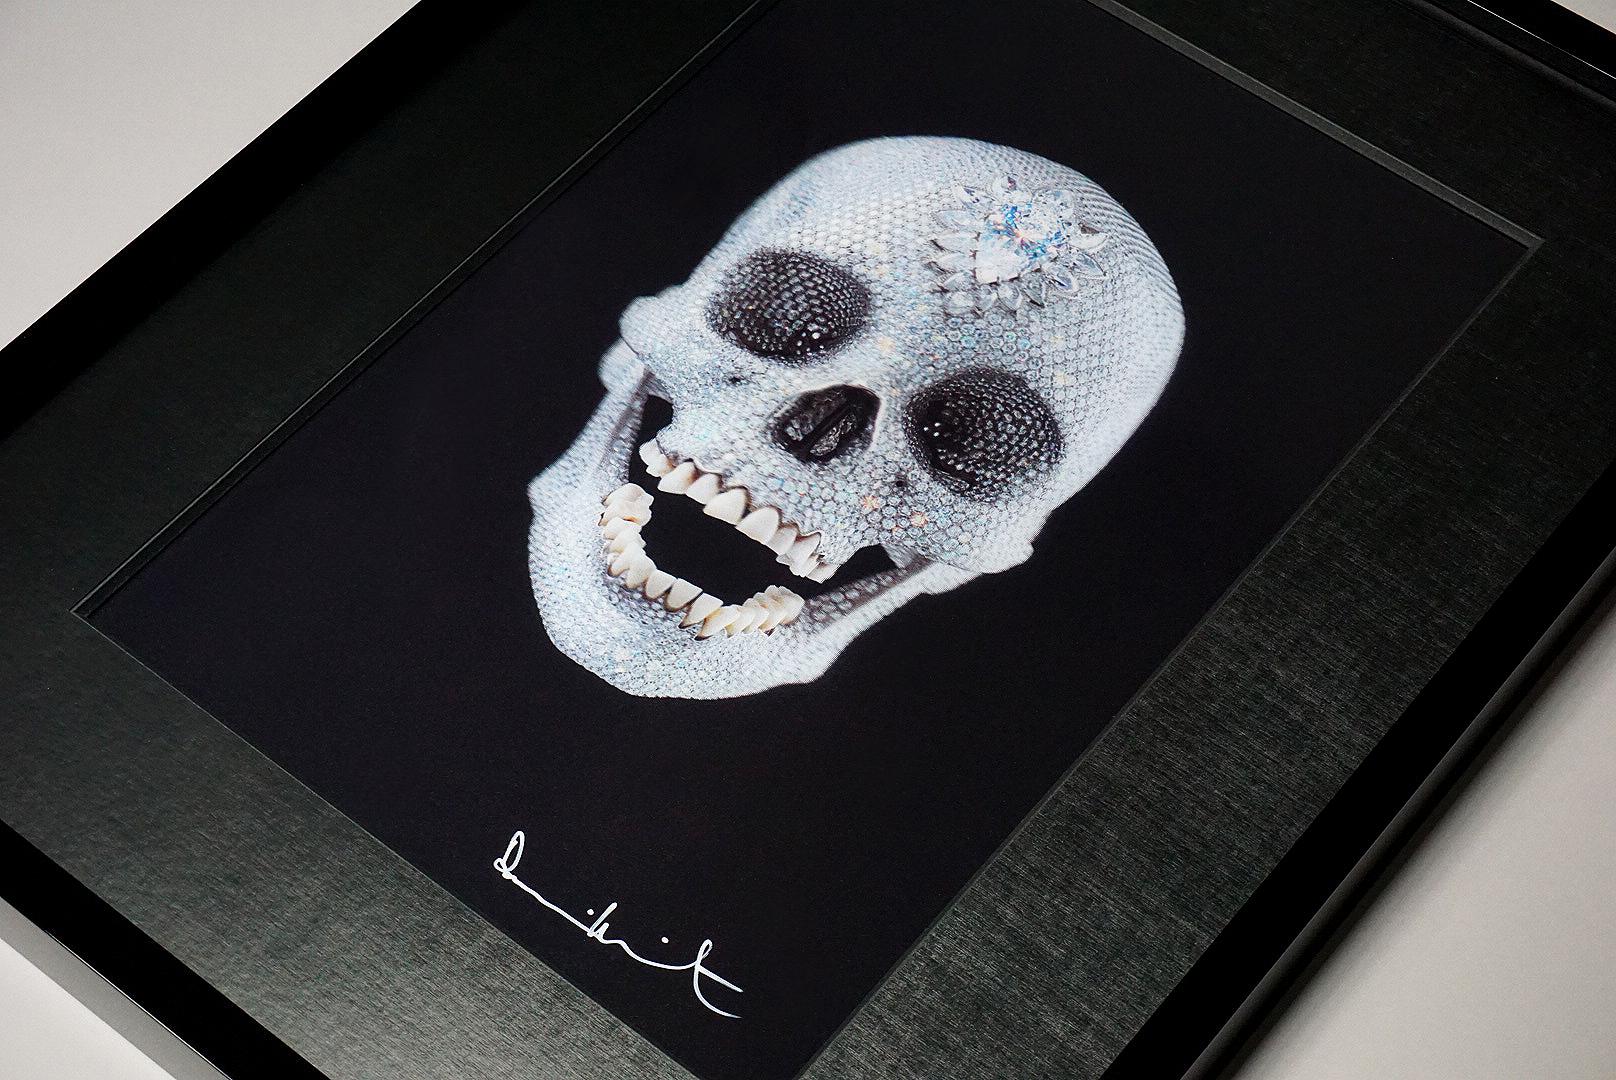 A brilliant lenticular print of the famed 'For The Love Of God' diamond encrusted skull created by master contemporary artist, Damien Hirst. This lenticular print on PETG board has a glittering, lively effect as the skull 'moves' in respect to the